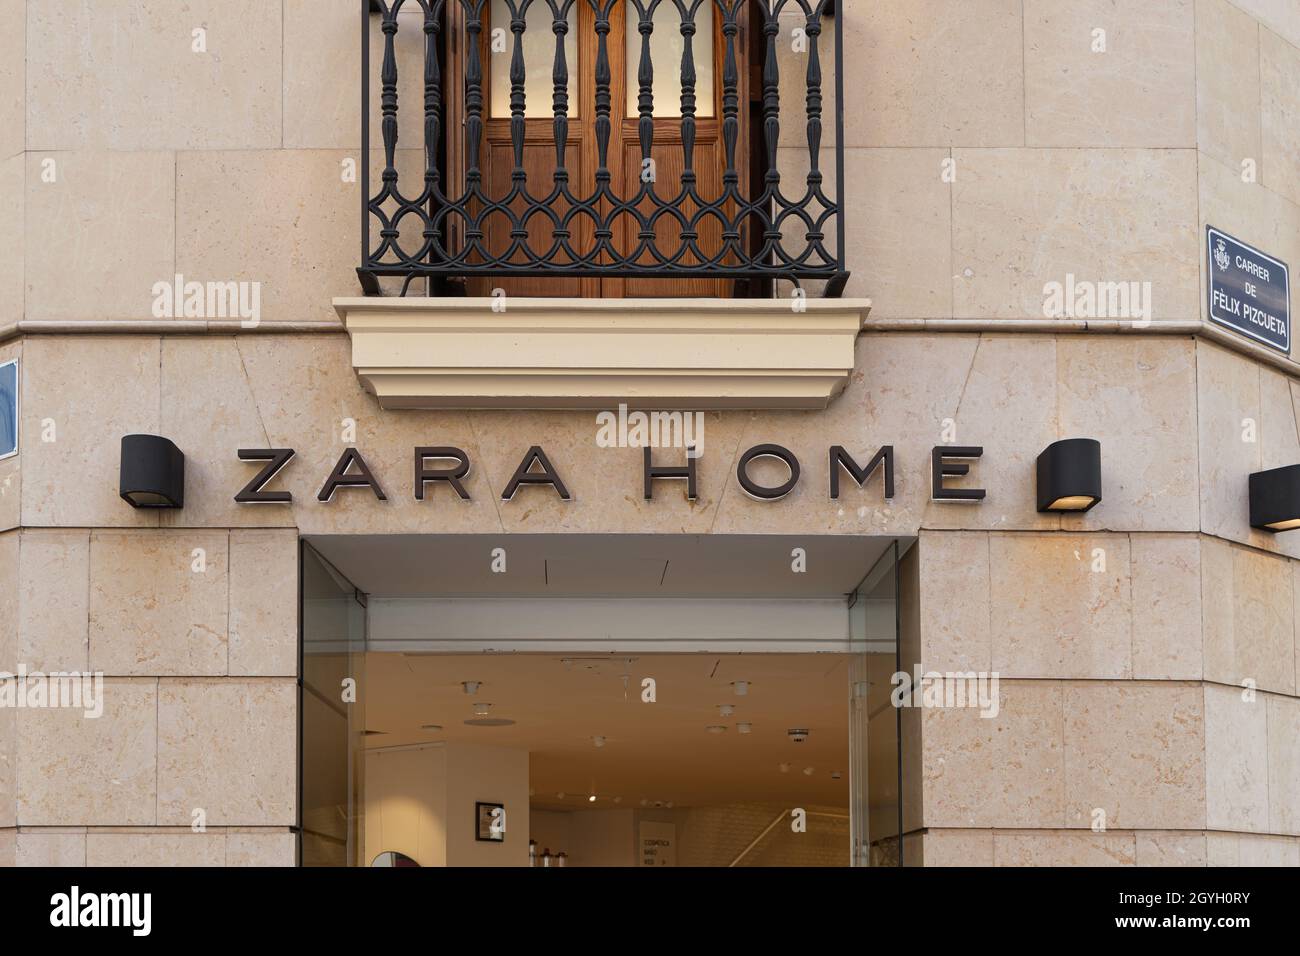 Zara home shop High Resolution Stock Photography and Images - Alamy